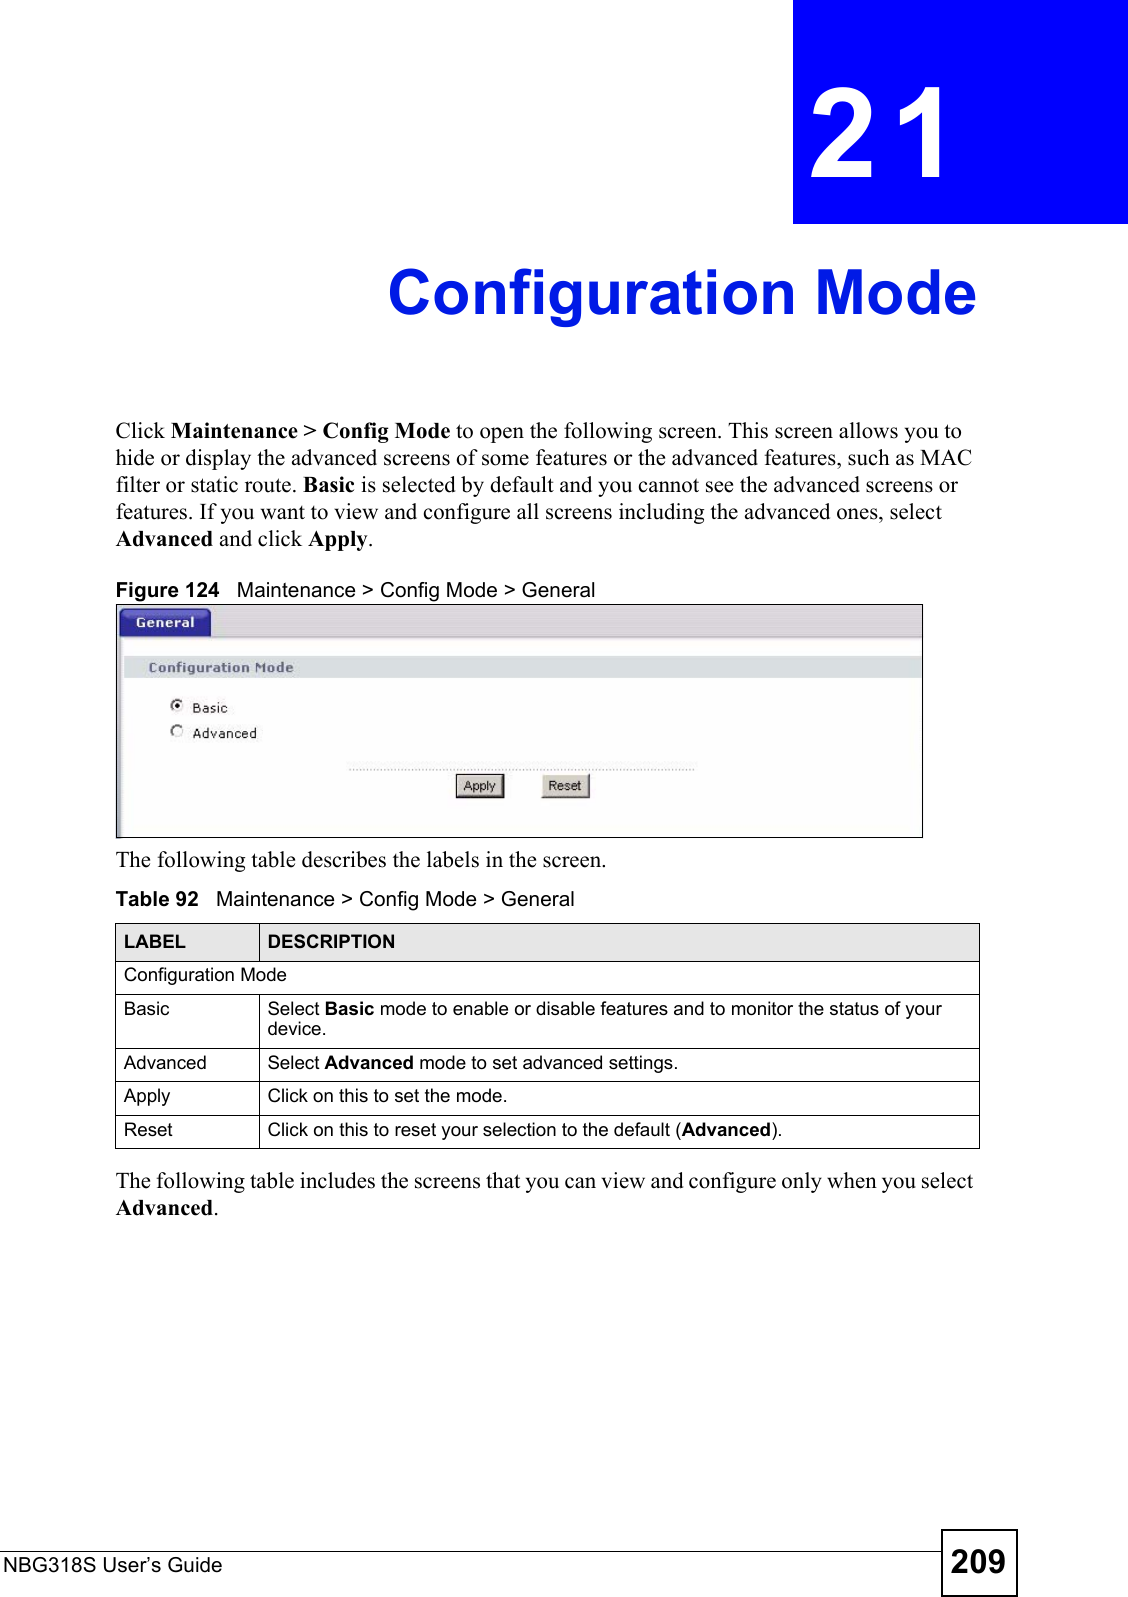 NBG318S User’s Guide 209CHAPTER  21 Configuration ModeClick Maintenance &gt; Config Mode to open the following screen. This screen allows you to hide or display the advanced screens of some features or the advanced features, such as MAC filter or static route. Basic is selected by default and you cannot see the advanced screens or features. If you want to view and configure all screens including the advanced ones, select Advanced and click Apply. Figure 124   Maintenance &gt; Config Mode &gt; General The following table describes the labels in the screen.Table 92   Maintenance &gt; Config Mode &gt; General The following table includes the screens that you can view and configure only when you select Advanced.LABEL DESCRIPTIONConfiguration ModeBasic Select Basic mode to enable or disable features and to monitor the status of your device.Advanced Select Advanced mode to set advanced settings.Apply Click on this to set the mode.Reset Click on this to reset your selection to the default (Advanced).